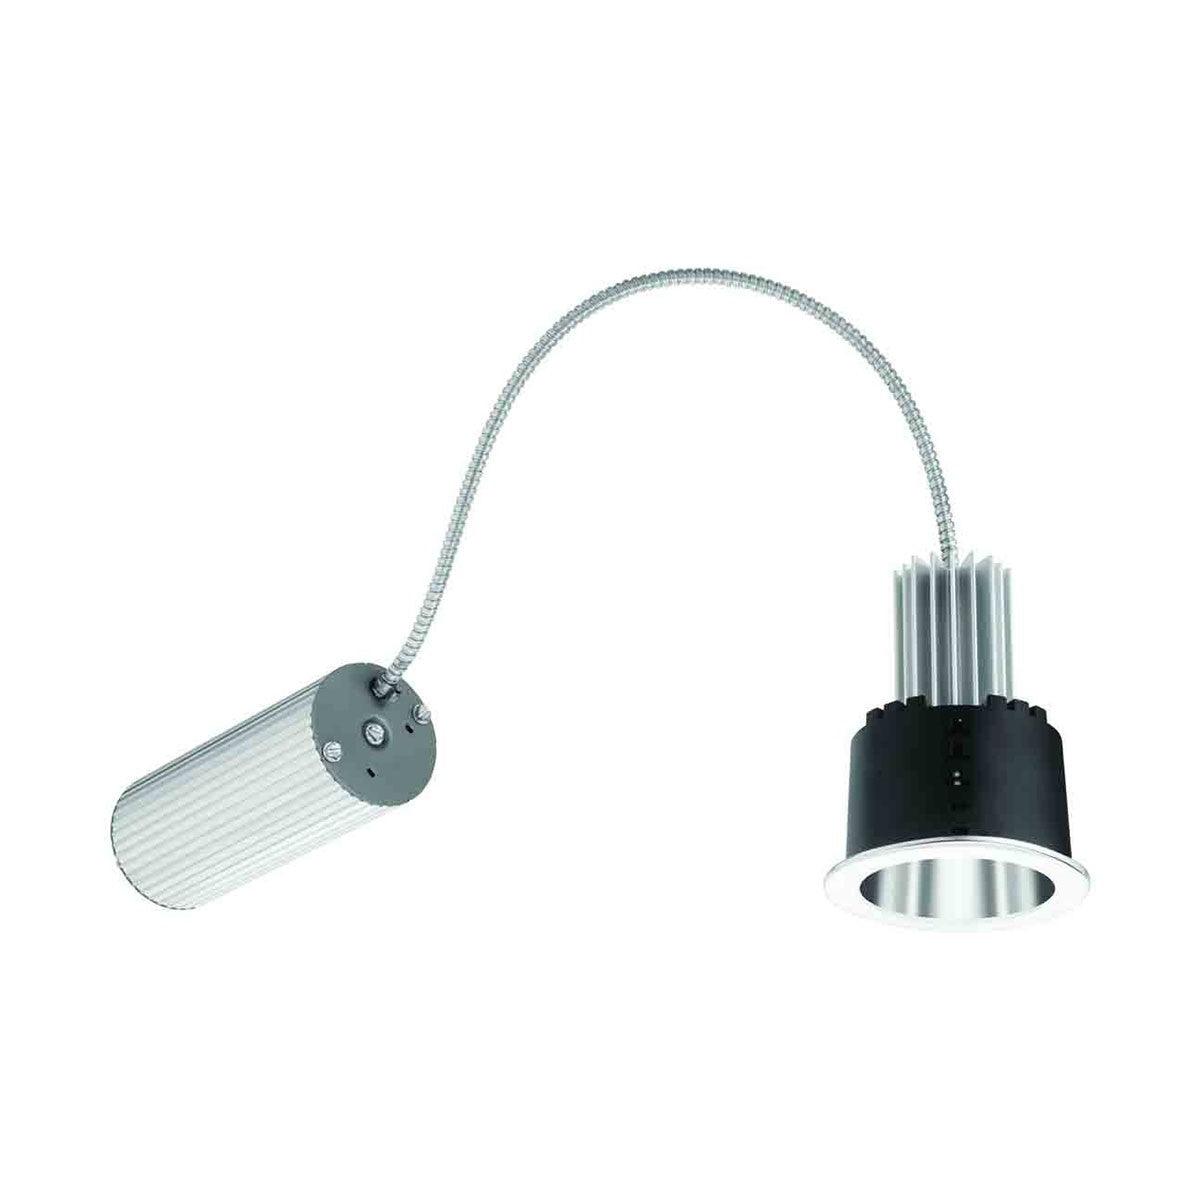 Lithonia LDN3 Commercial LED Recessed Downlight,, 1000 lumens, 3500K (Reflector Sold Separately)